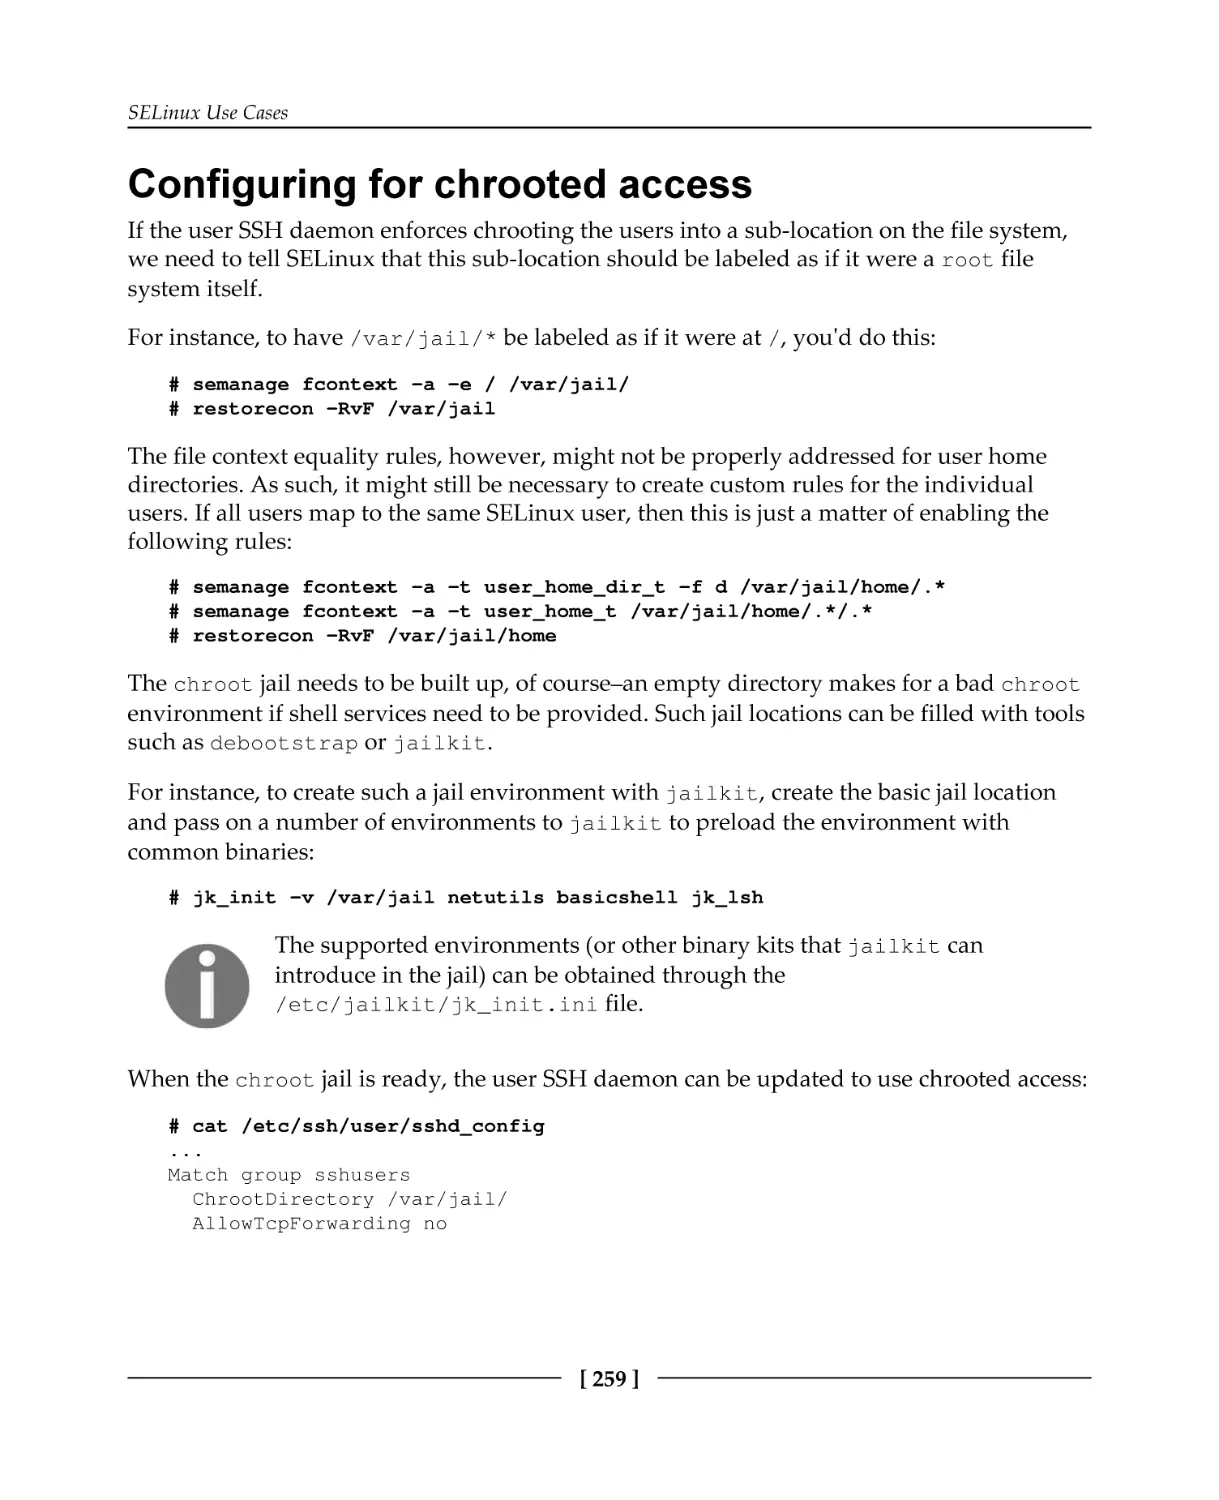 Configuring for chrooted access